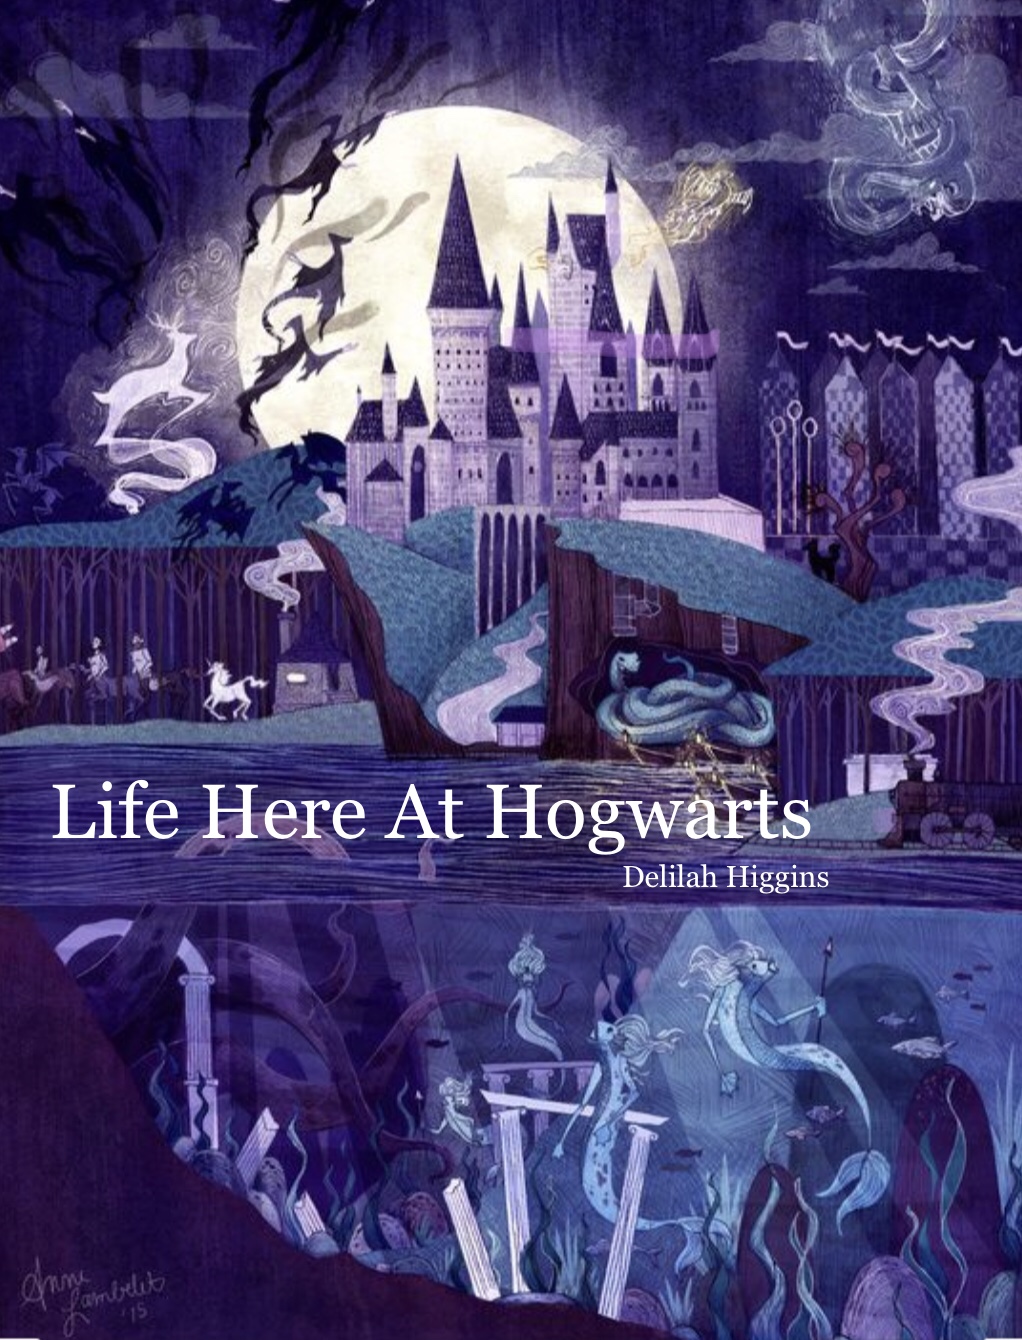 when is the last day to pre order hogwarts legacy